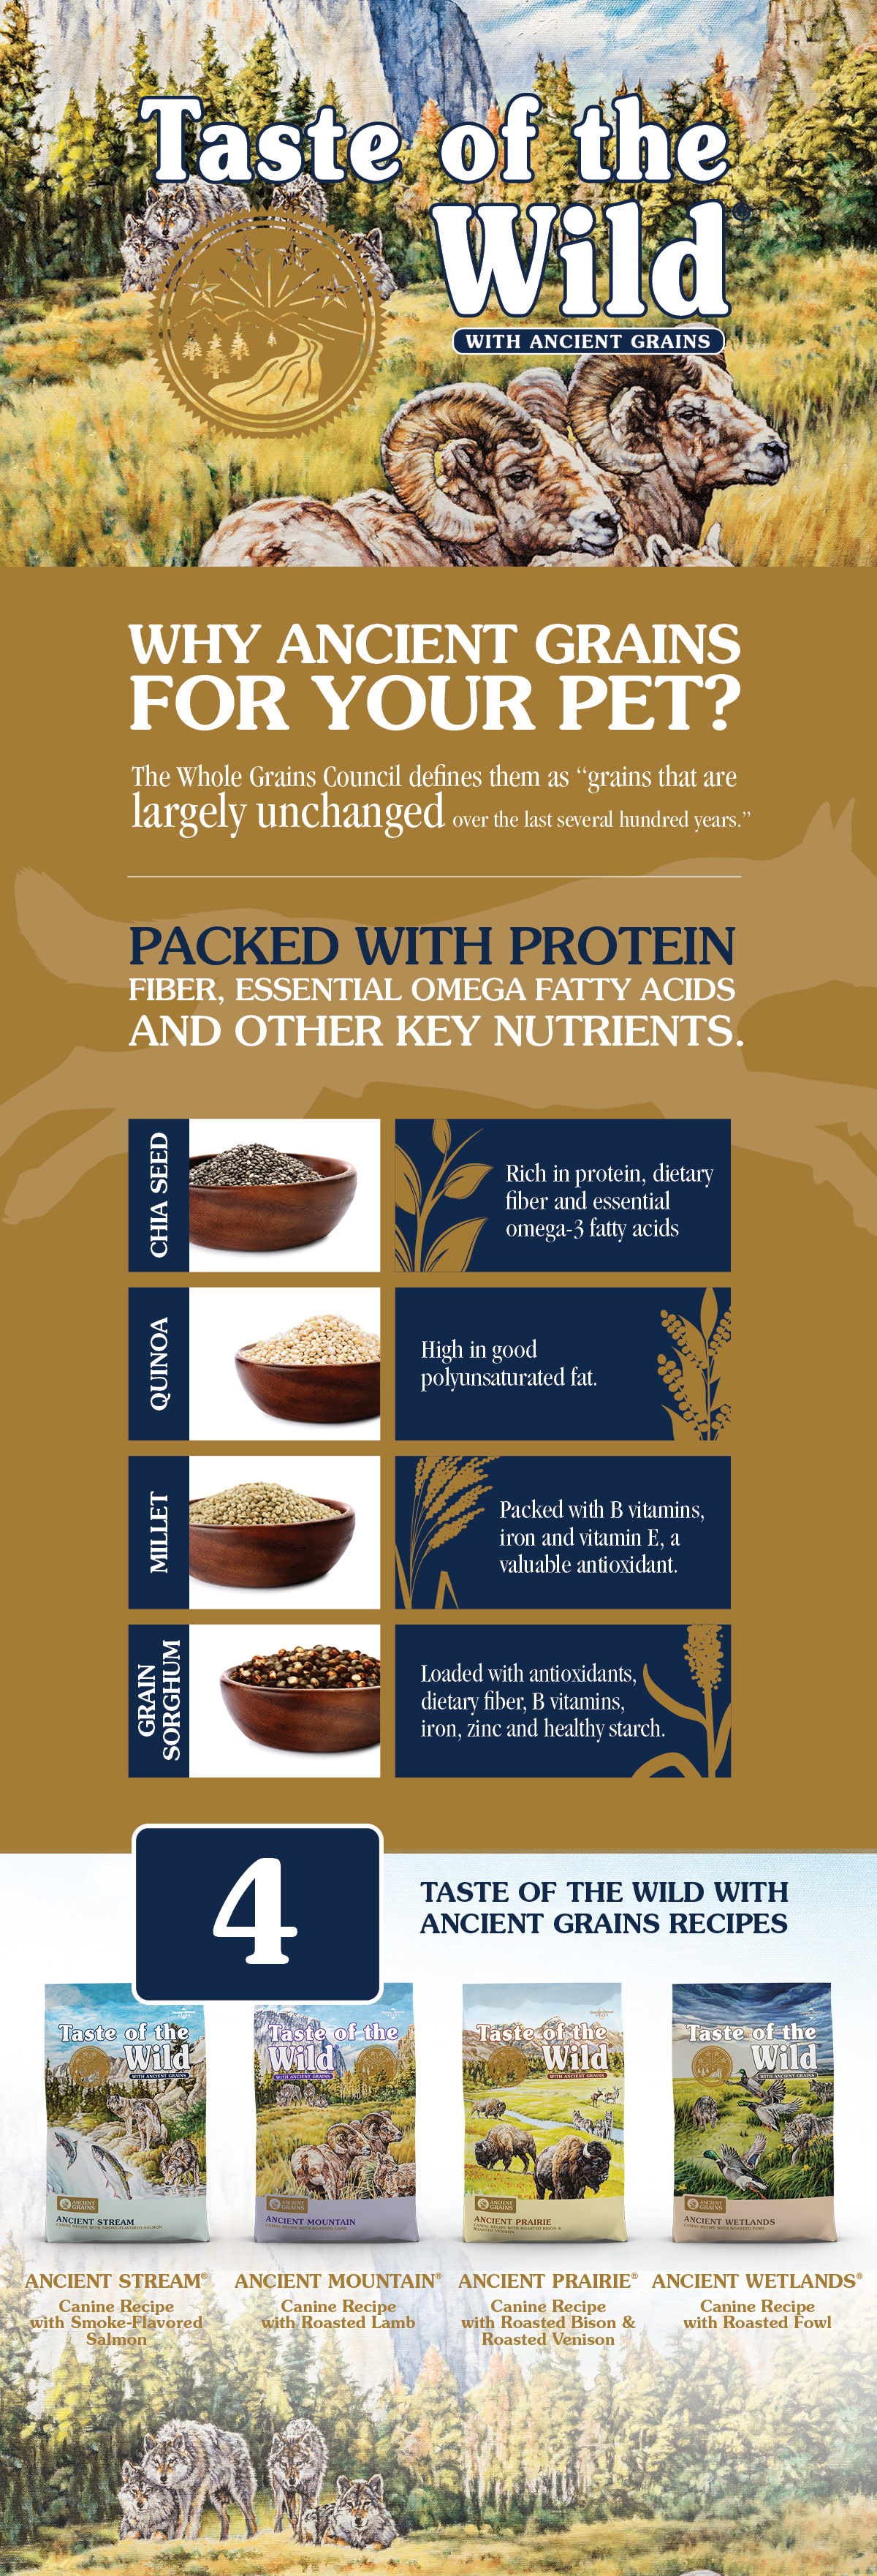 Why Ancient Grains for Your Pet Infographic